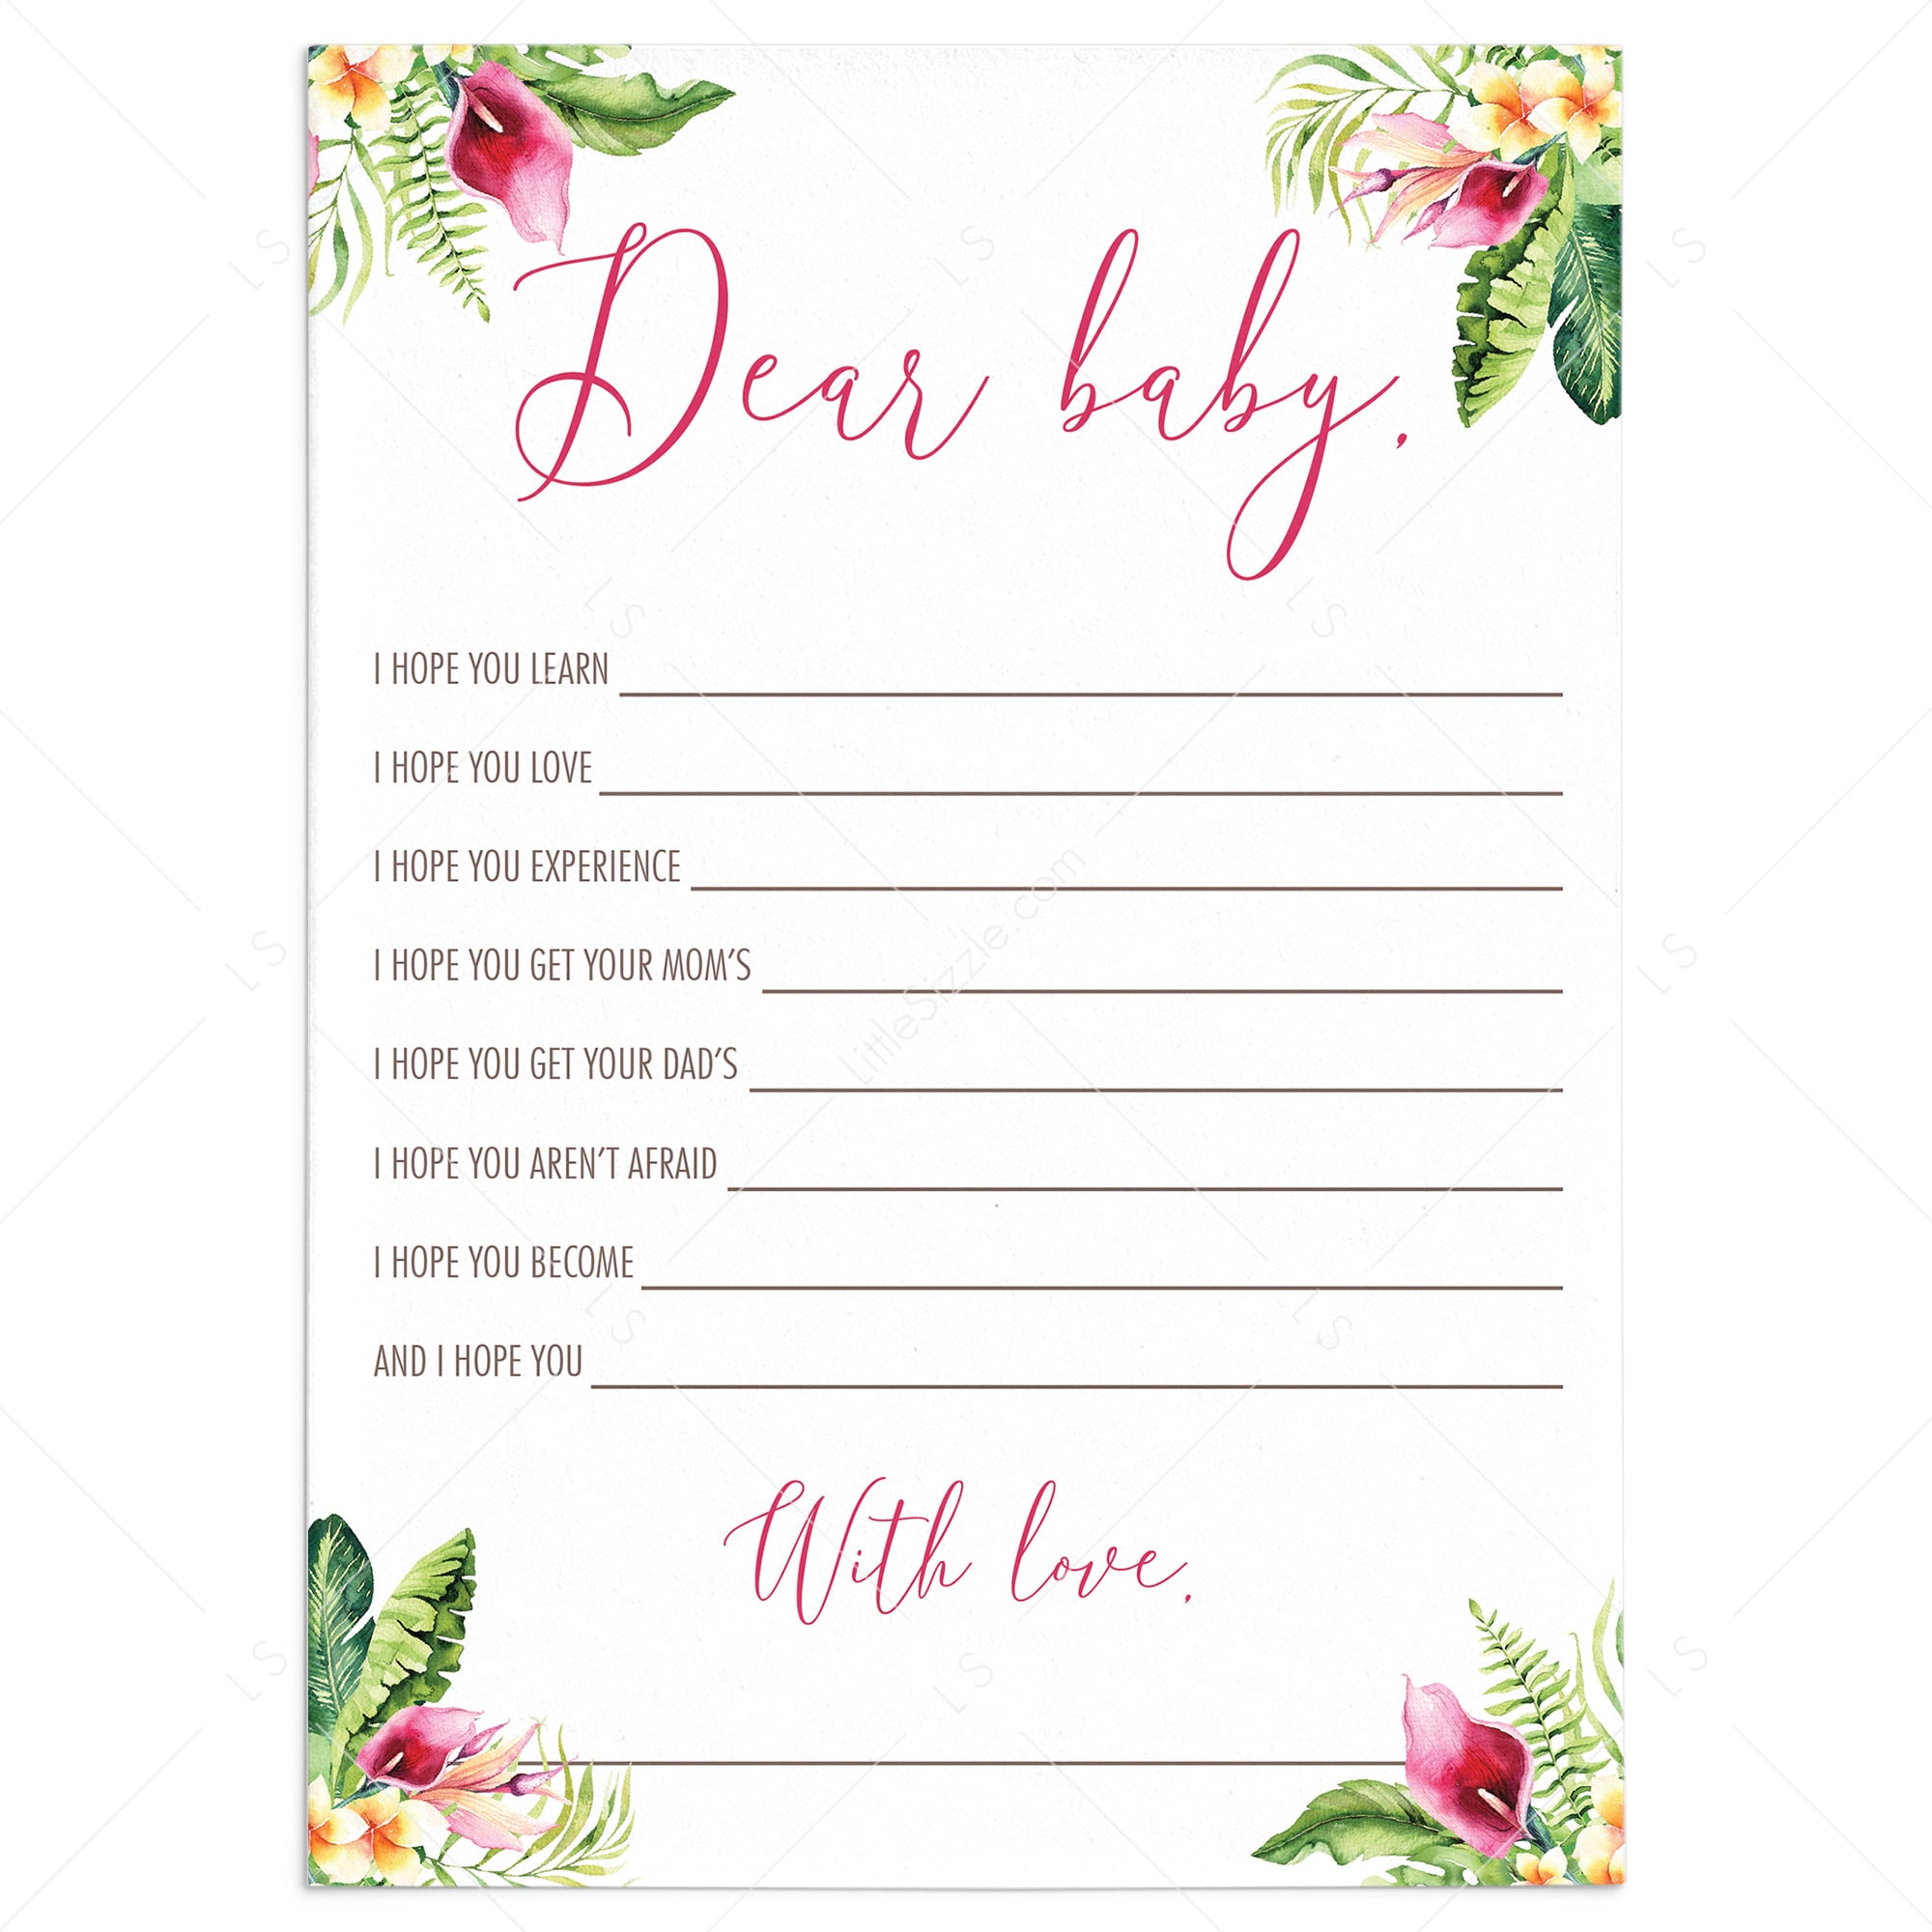 Summer baby shower wishes for baby cards printable by LittleSizzle